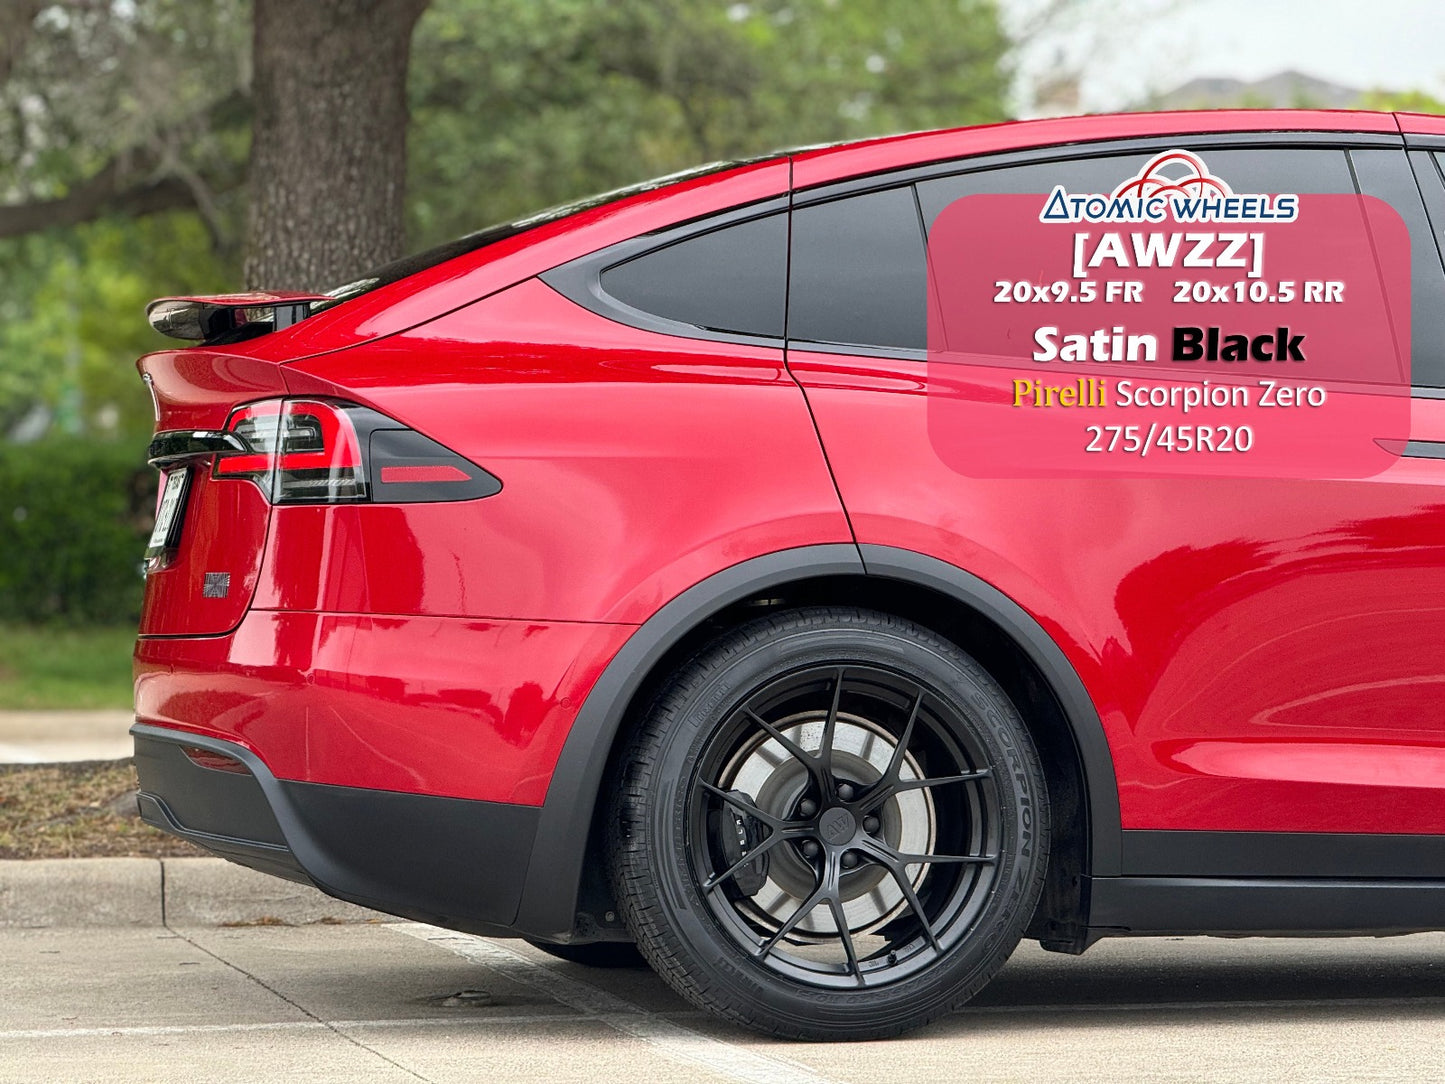 Set of 4 [AWZZ] Rims and Tires for Tesla Model S/X